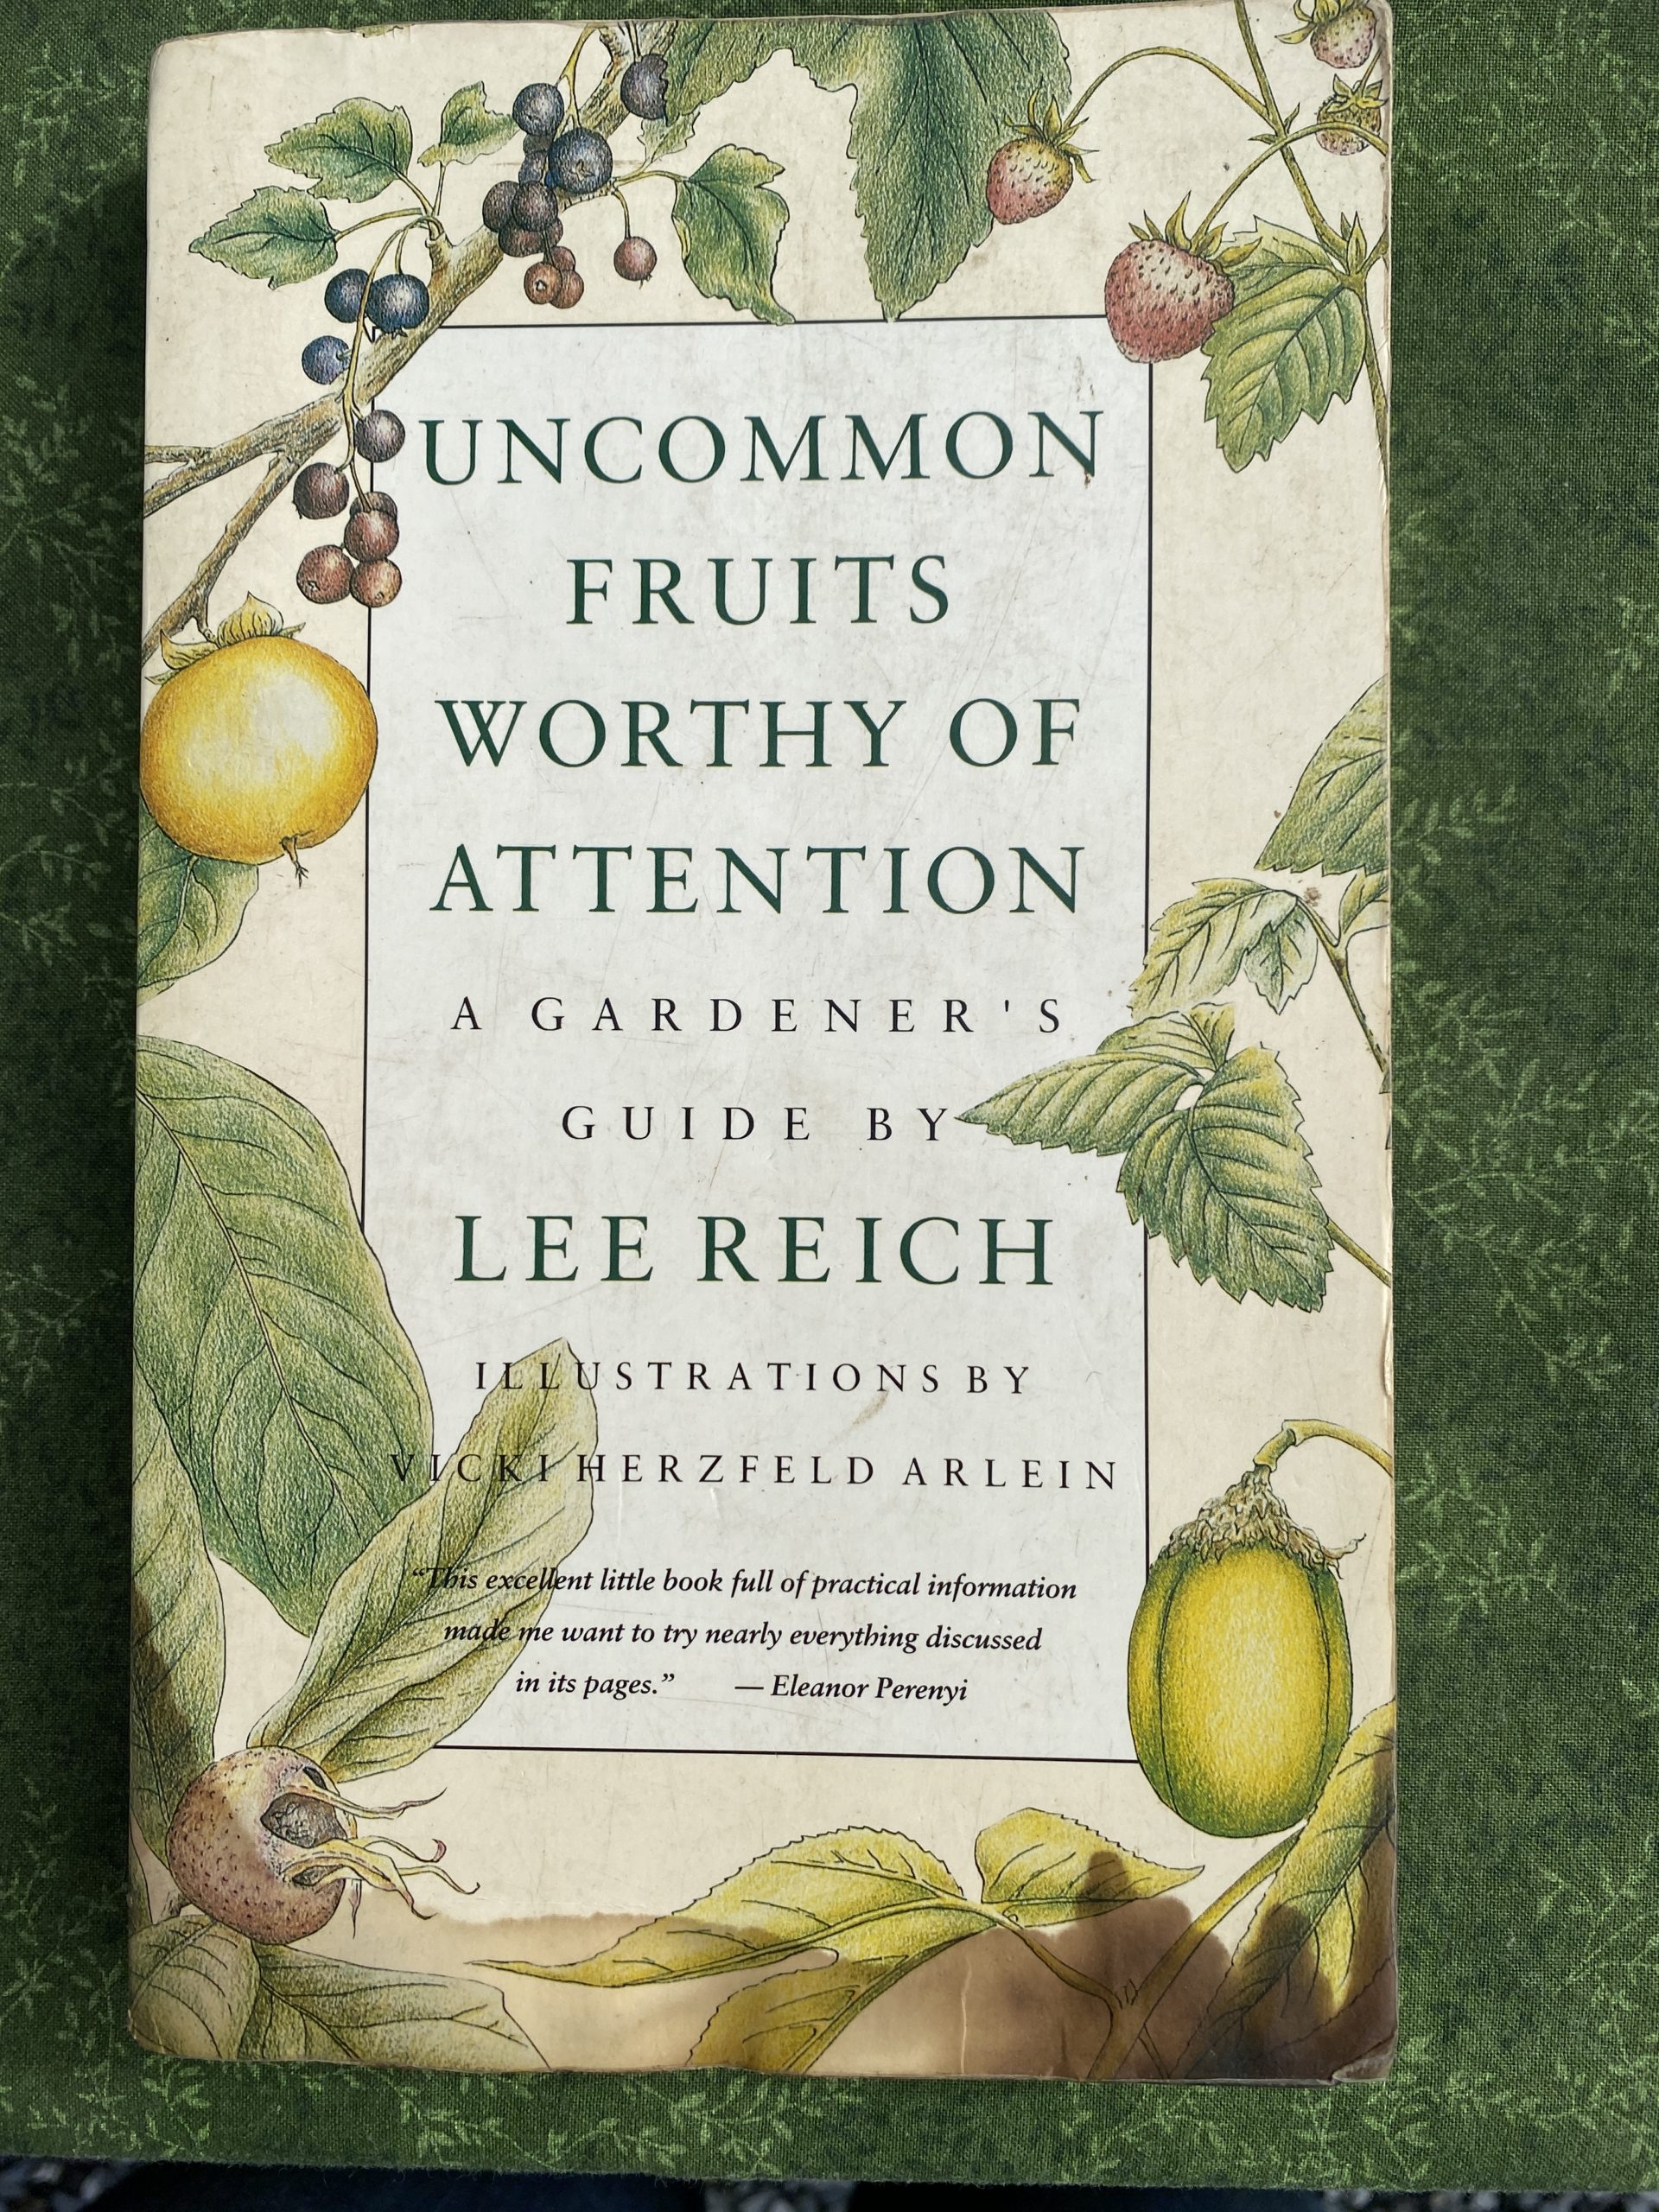 Uncommon Fruits Worthy of Attention: A Gardener's Guide by Lee Reich